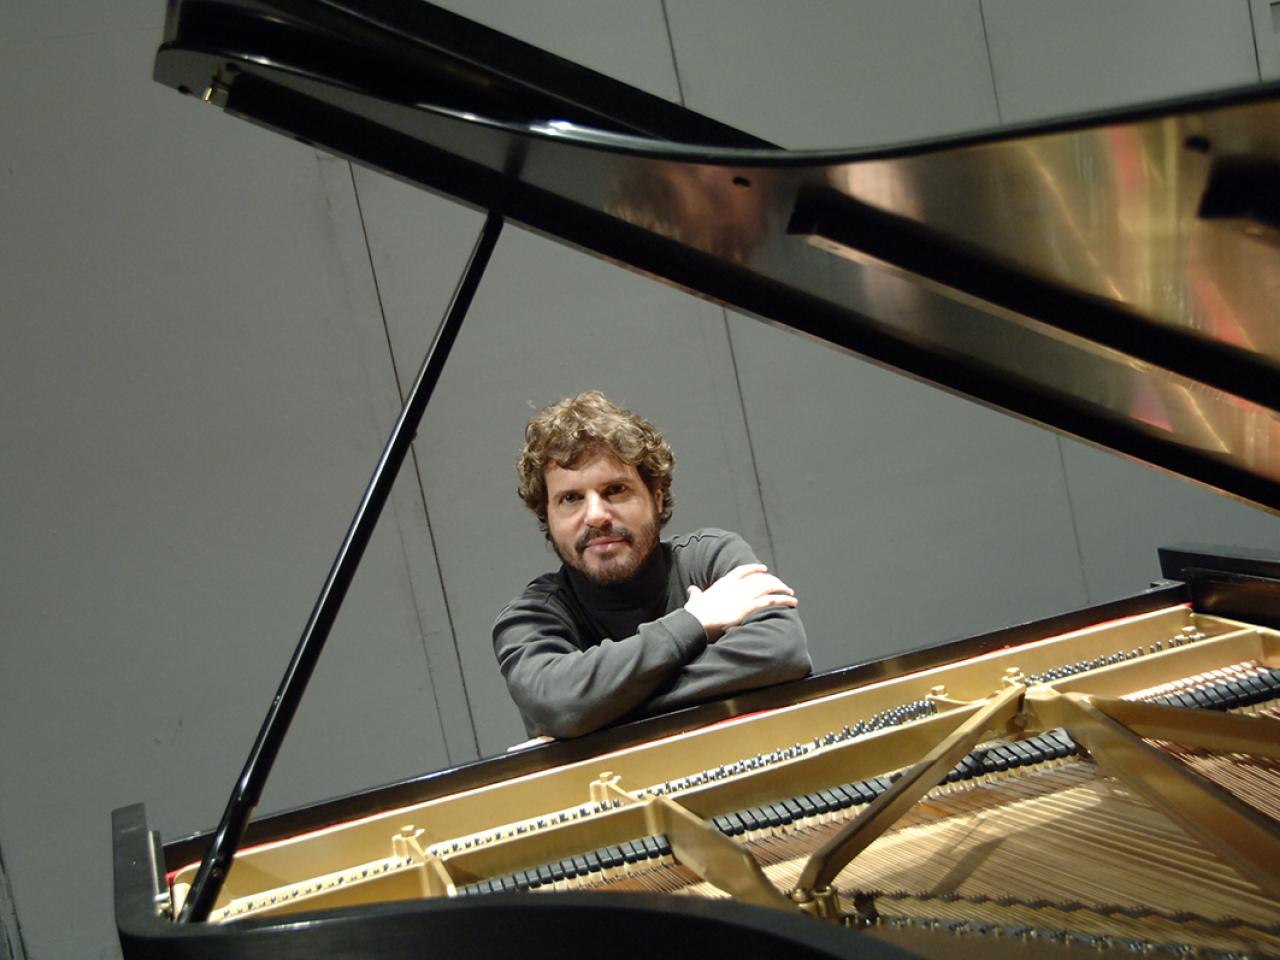 Steven Glaser sits behind a piano with his arms crossed, resting on top.